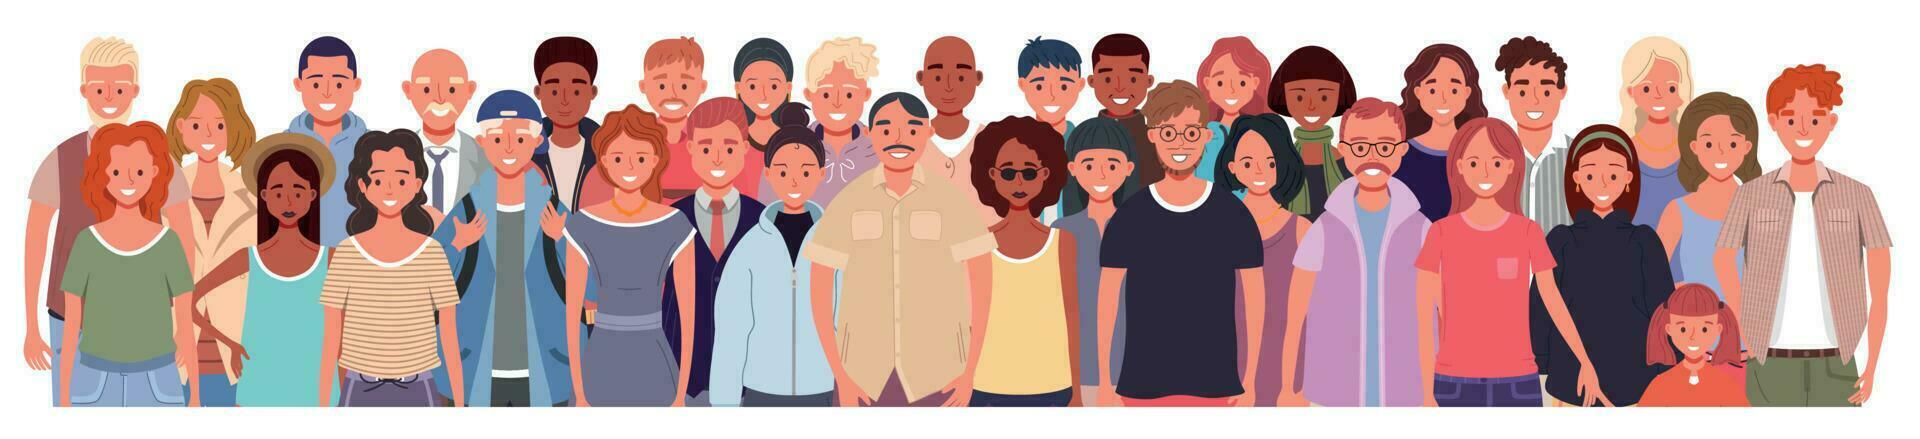 Multinational group of people isolated on white background. Children, adults and teenagers stand together. Vector illustration